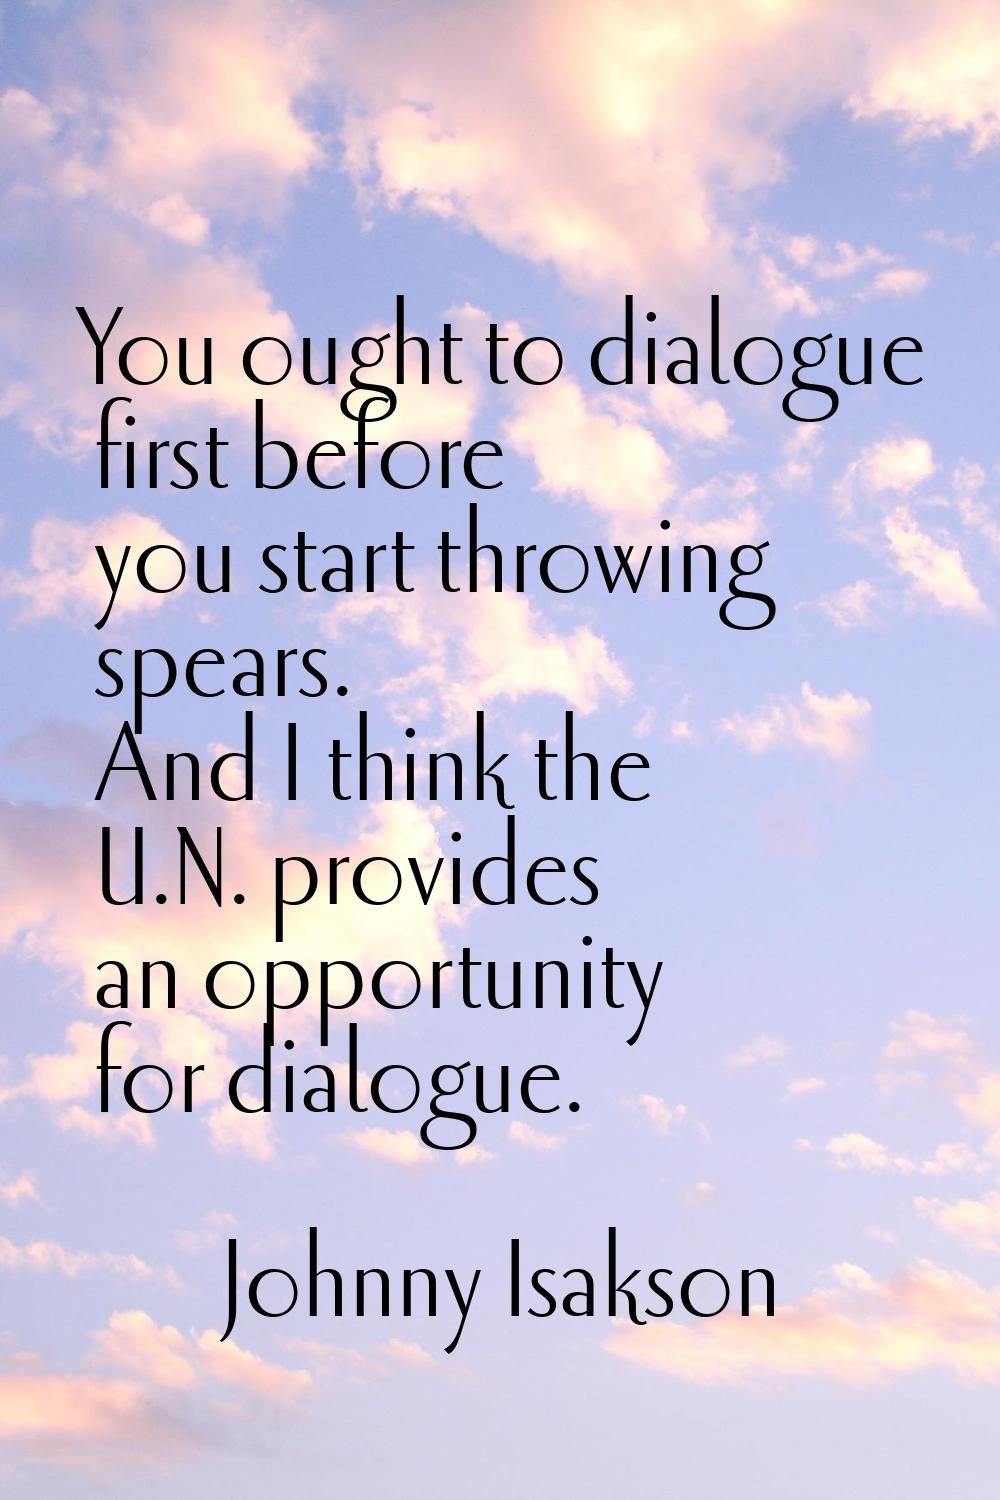 You ought to dialogue first before you start throwing spears. And I think the U.N. provides an oppo